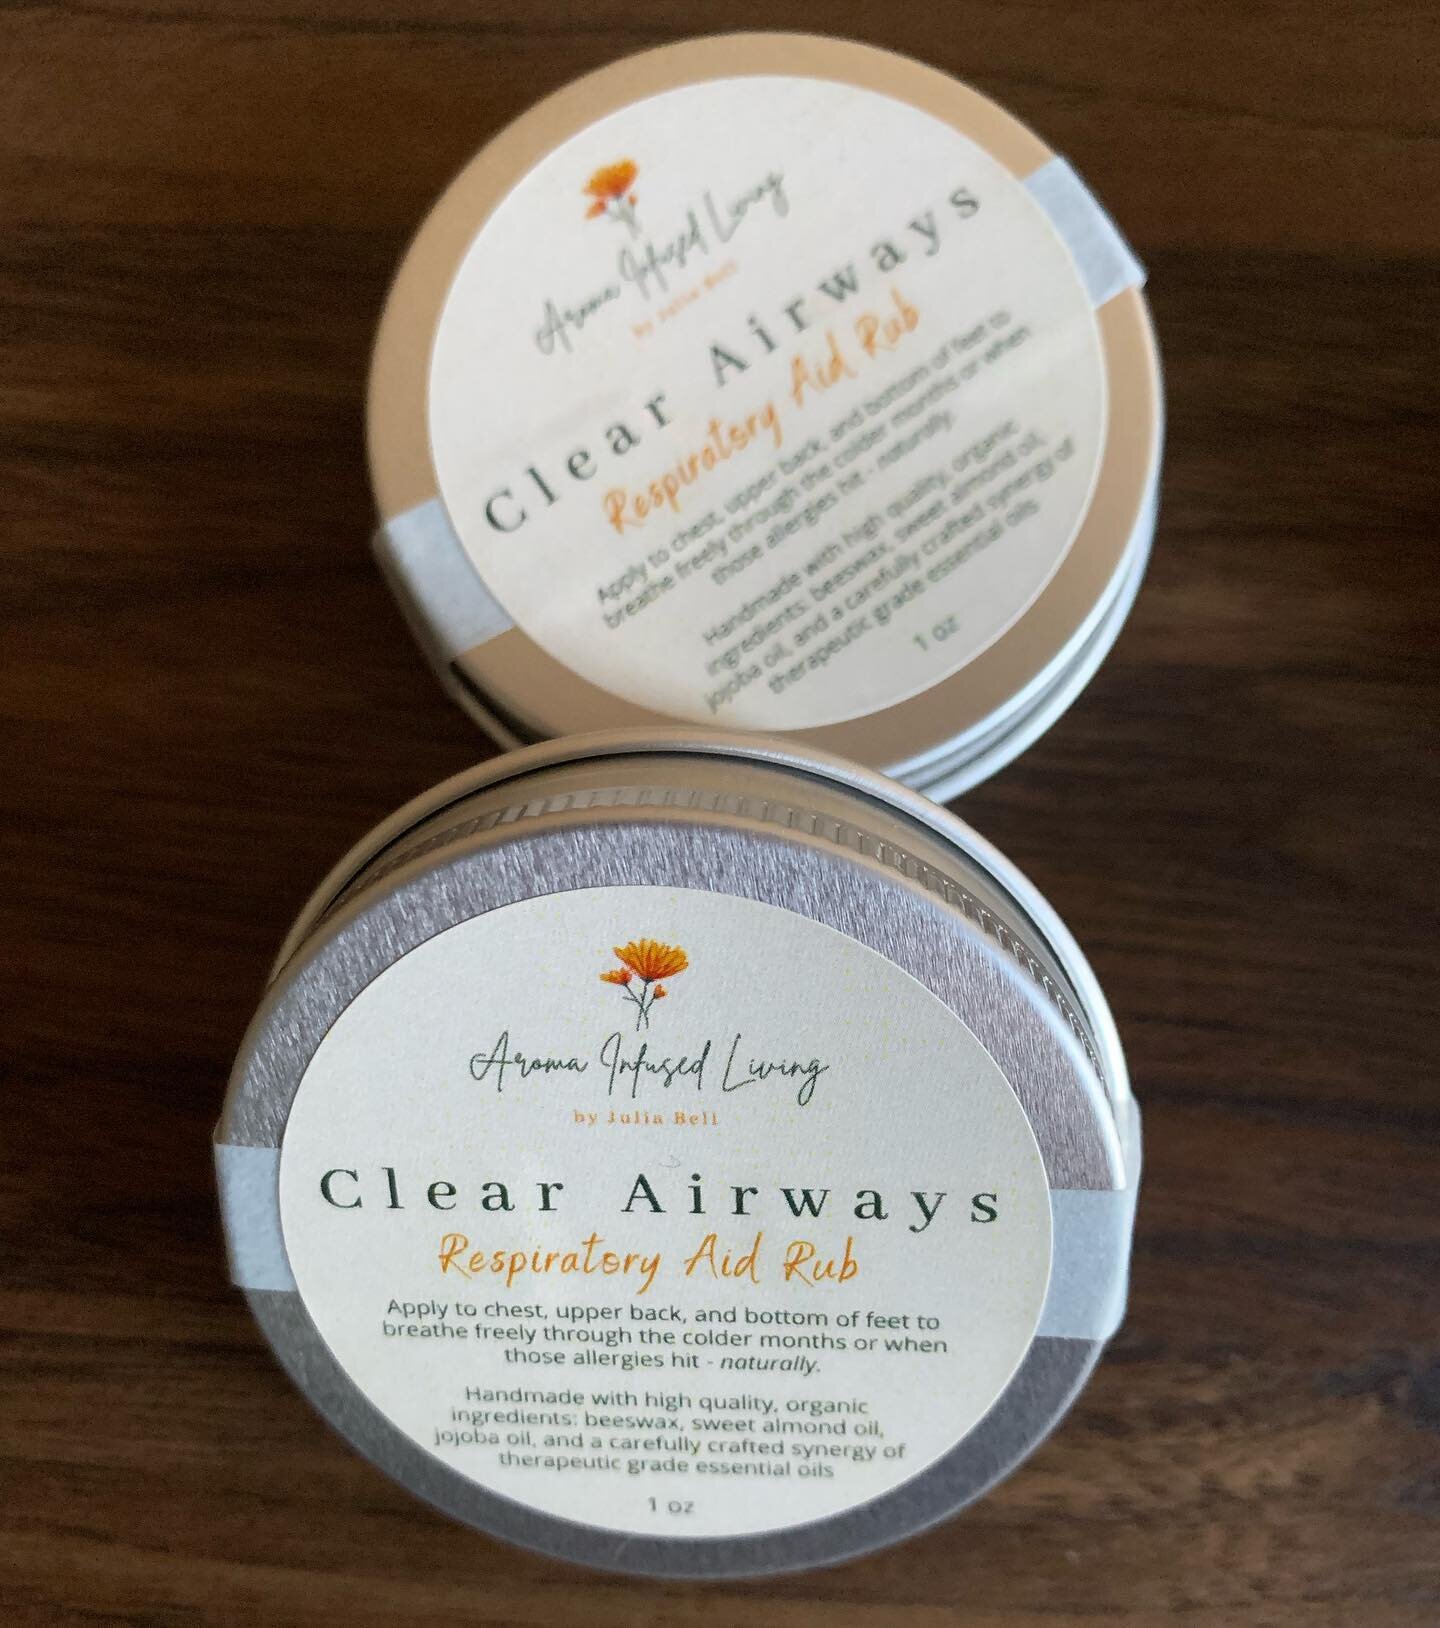 C l e a r  A i r w a y s 🌿 

The salve that started my tiny Aroma Infused Living shop. 

Ideal to support open airways during this allergy season (and also helps with coughs an congestion). 

🌱 Essential oil synergy:
Frankincense, Rosemary, Pepperm